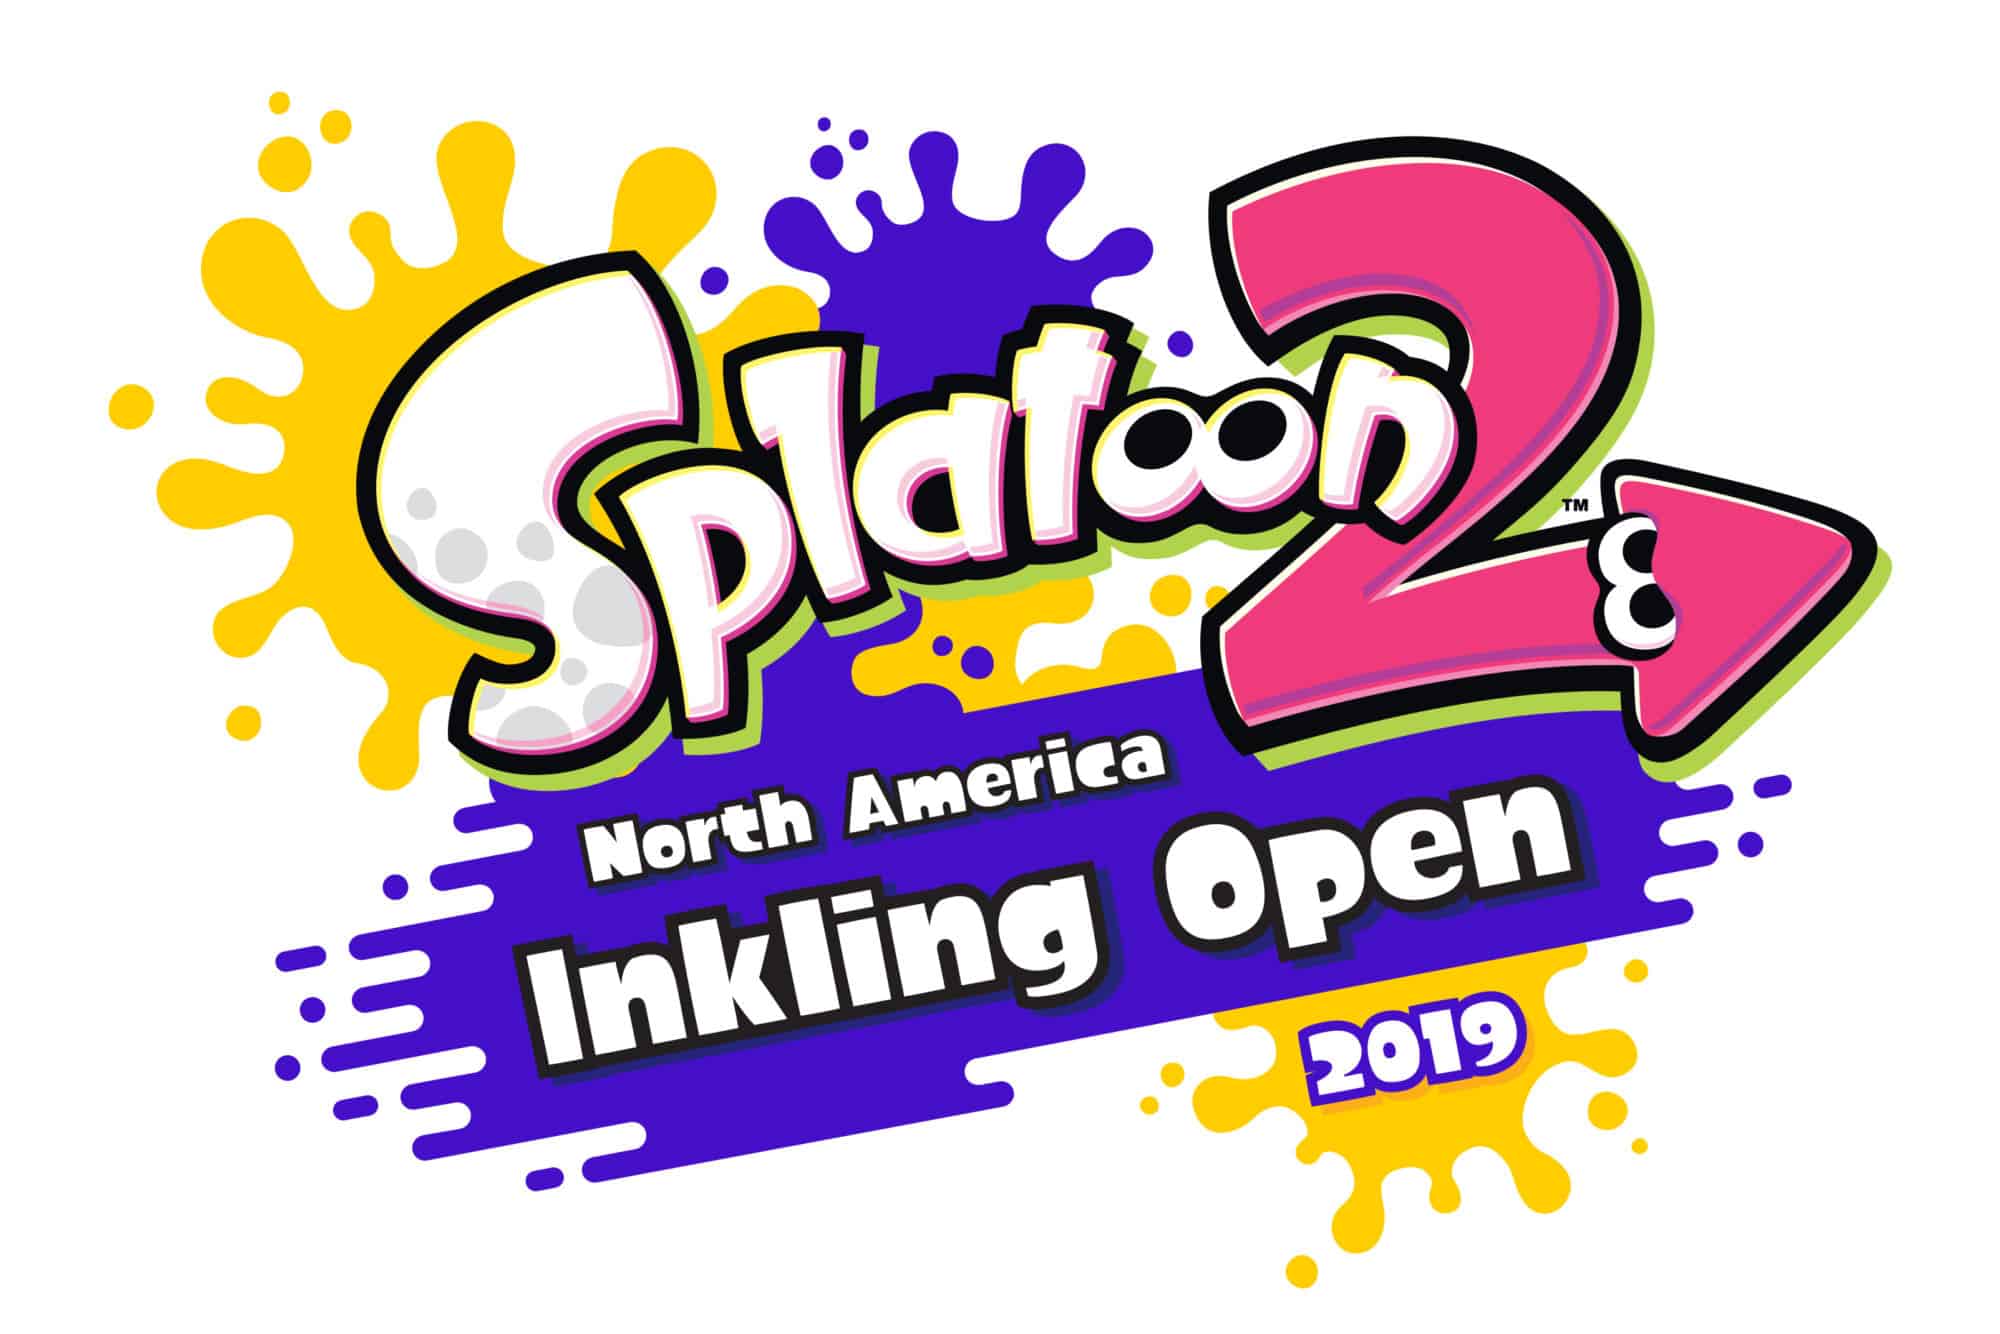 Get Splatting In The Splatoon 2 North American Inkling Open, Coming This Fall